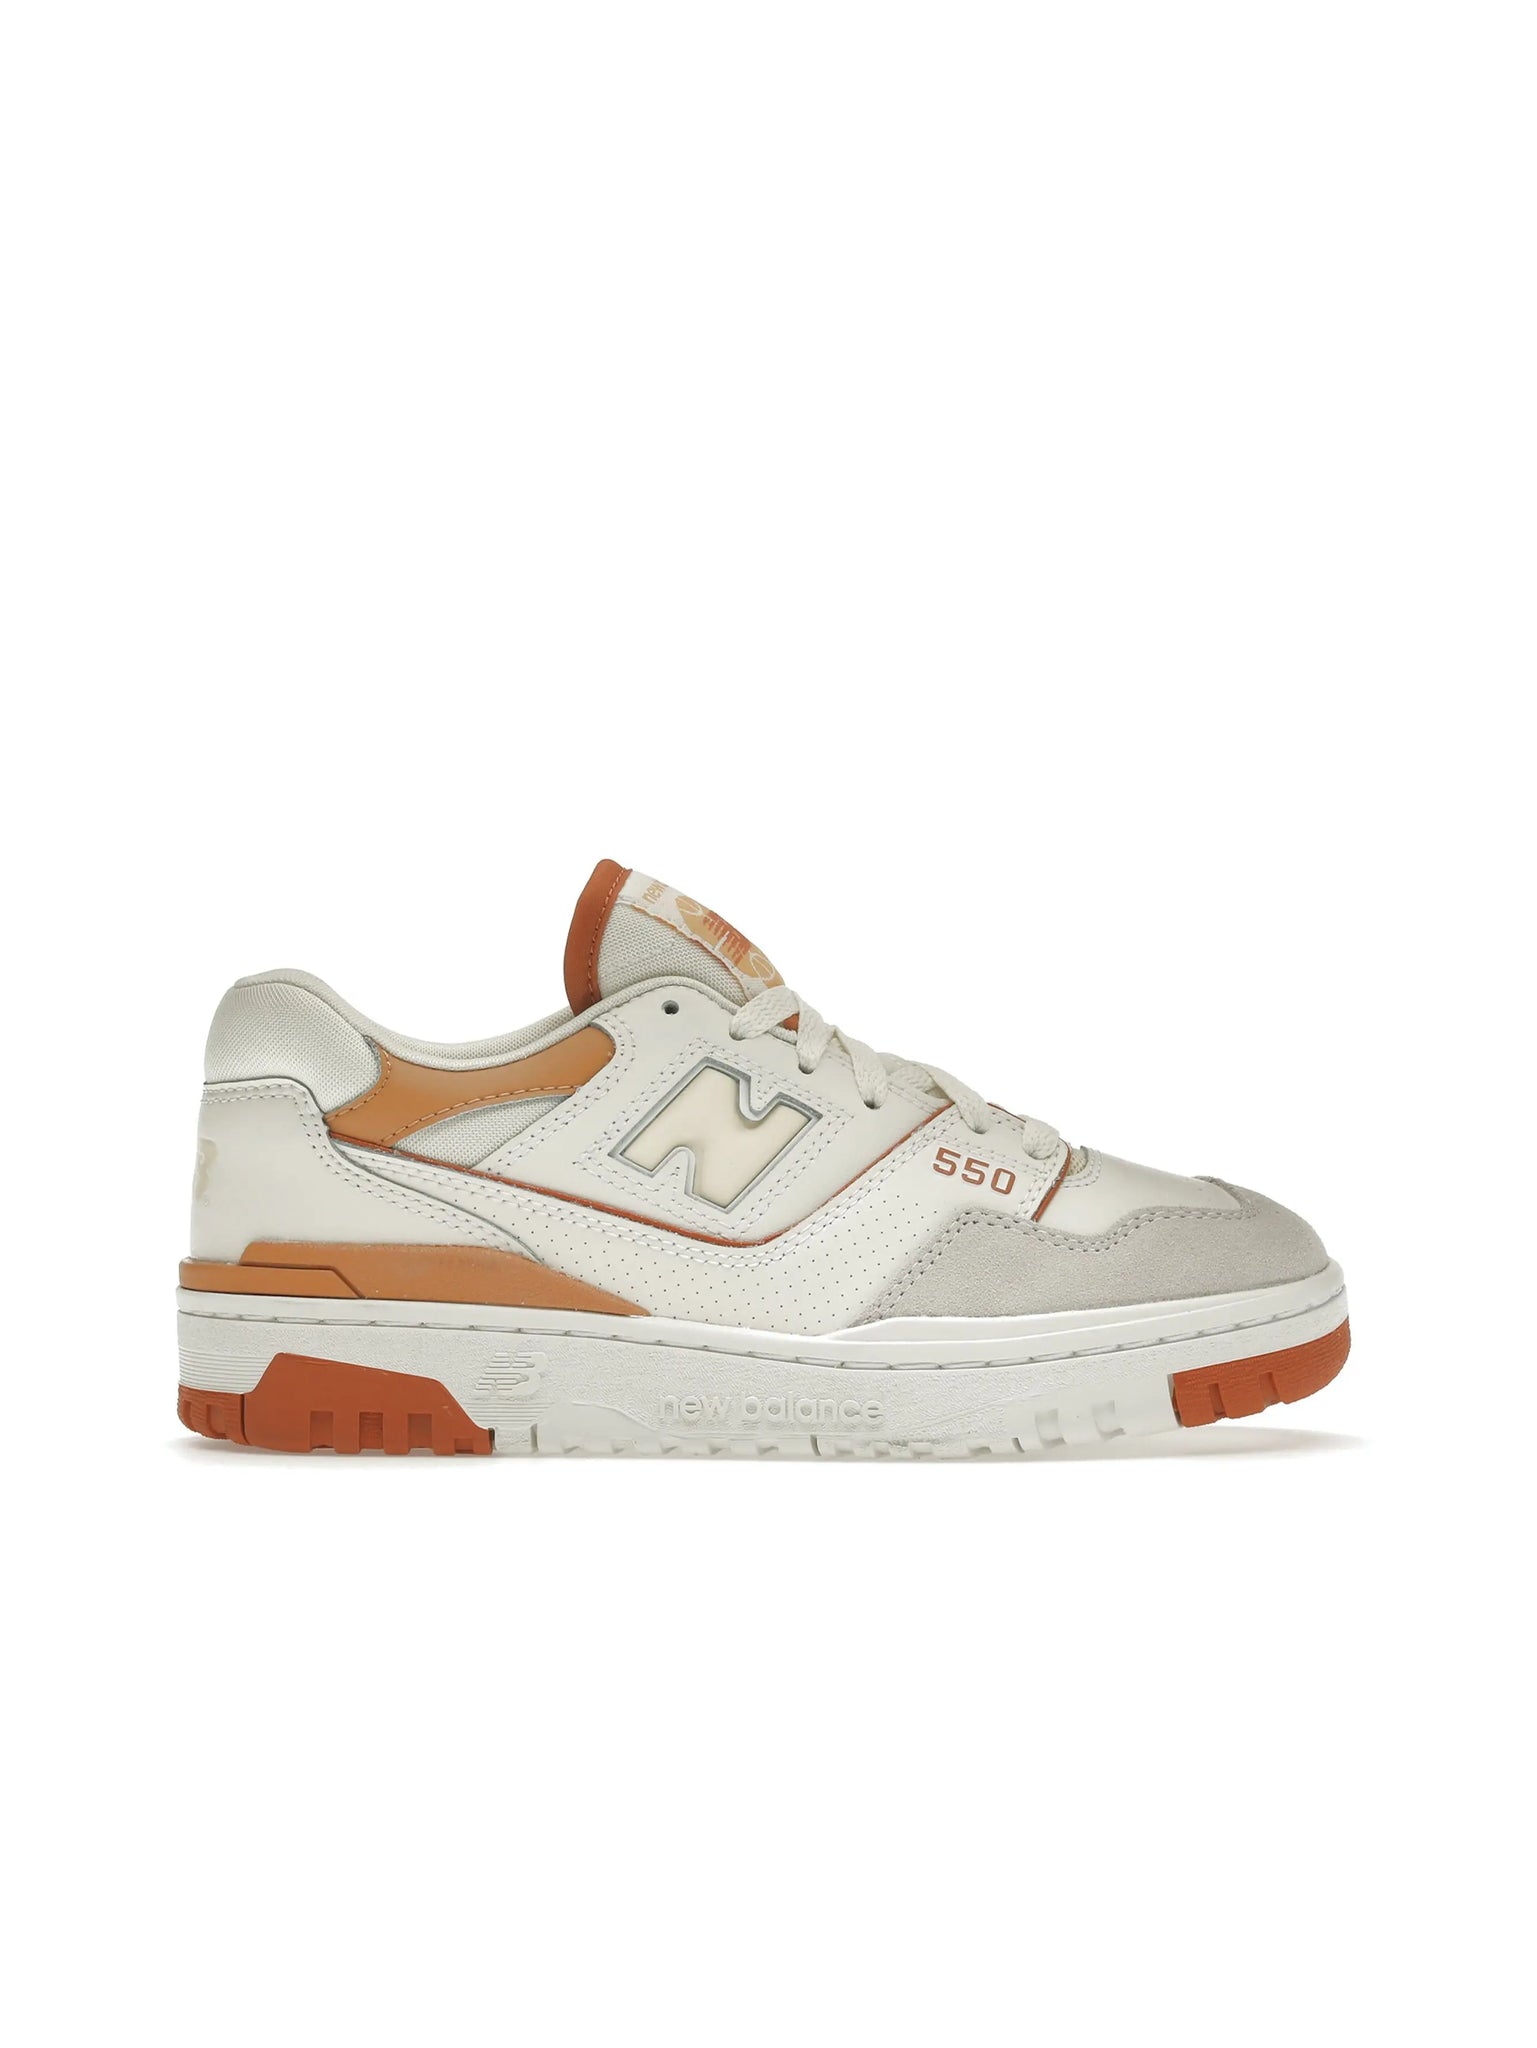 New Balance 550 Au Lait (W) in Auckland, New Zealand - Shop name